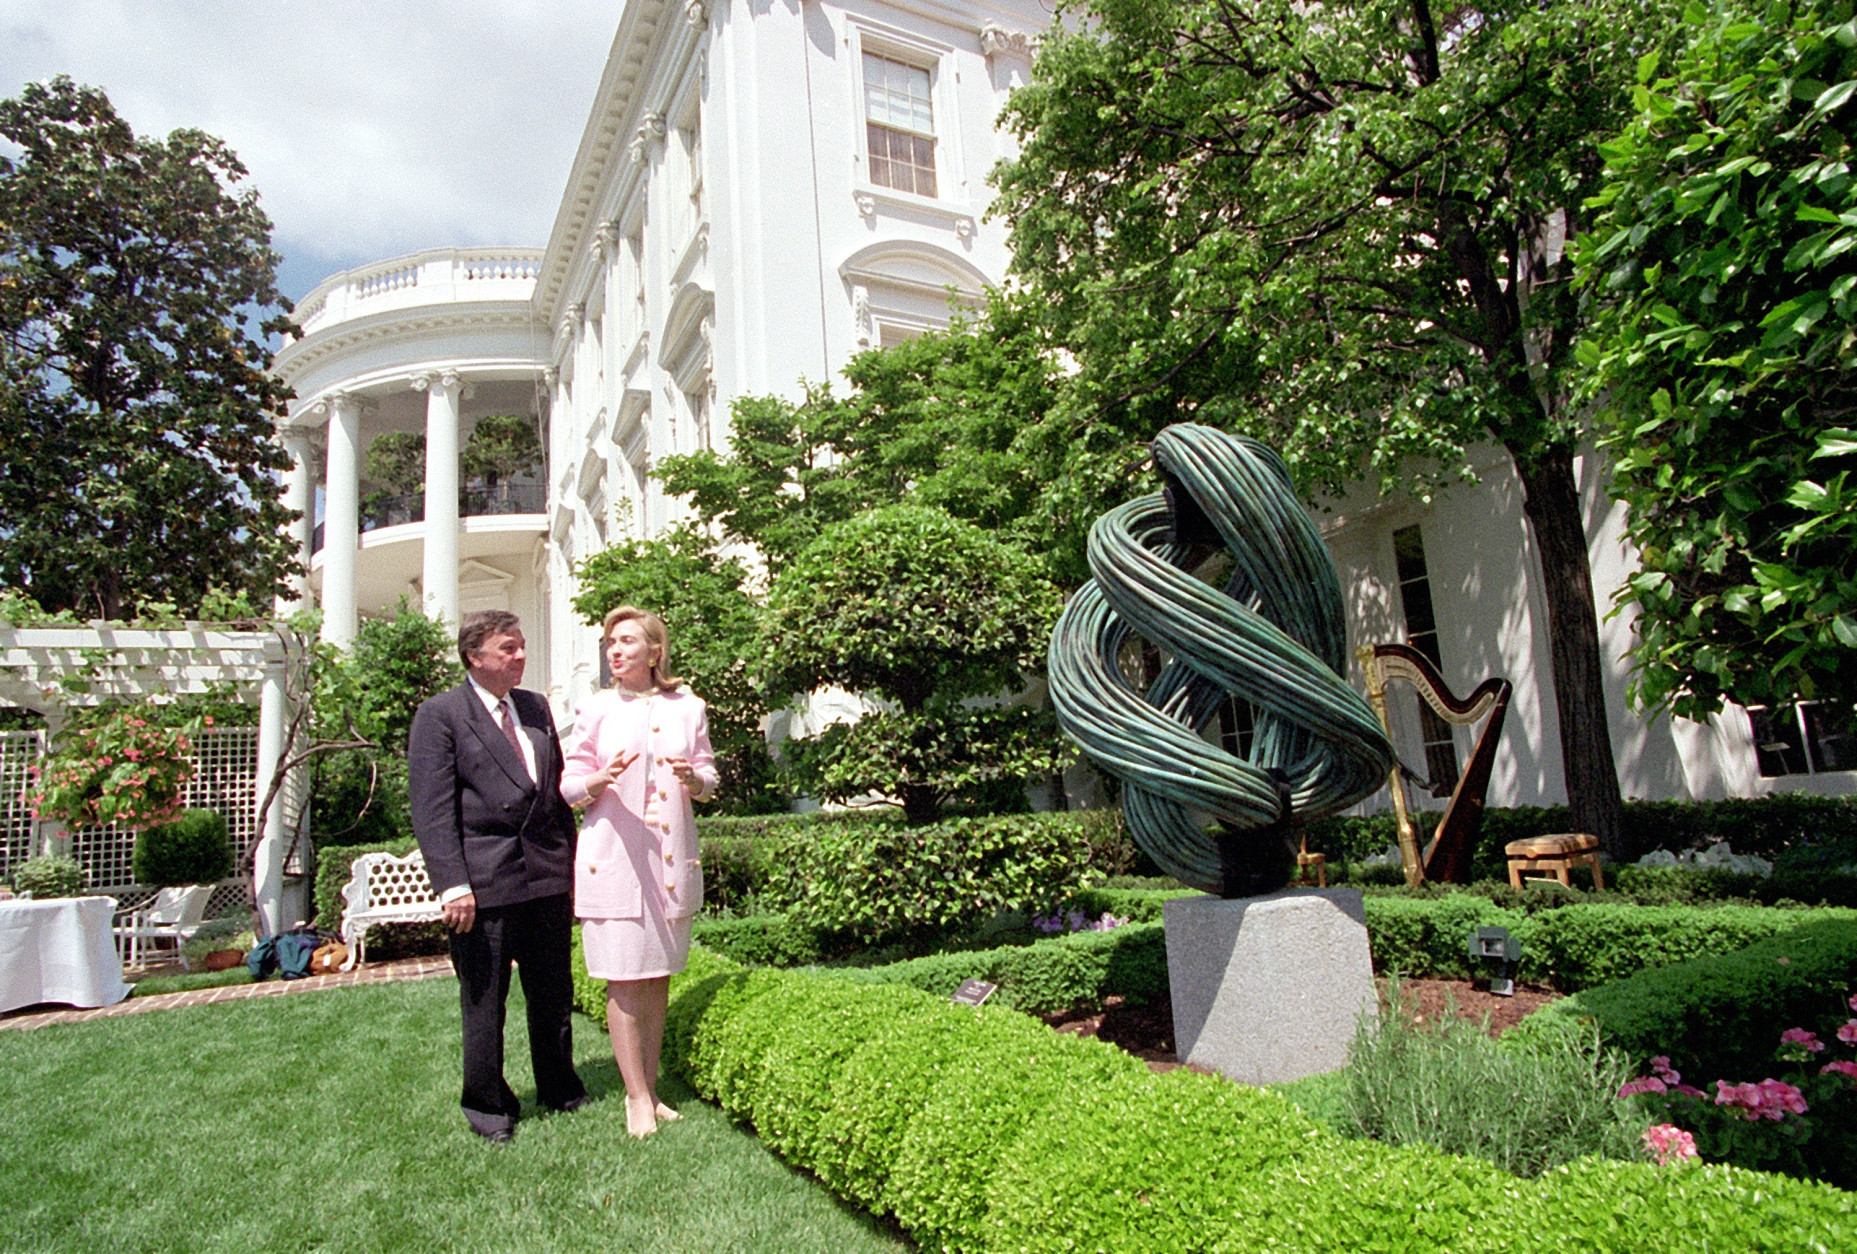 Hillary Clinton in the White House Sculpture Garden she created. (WTOP)